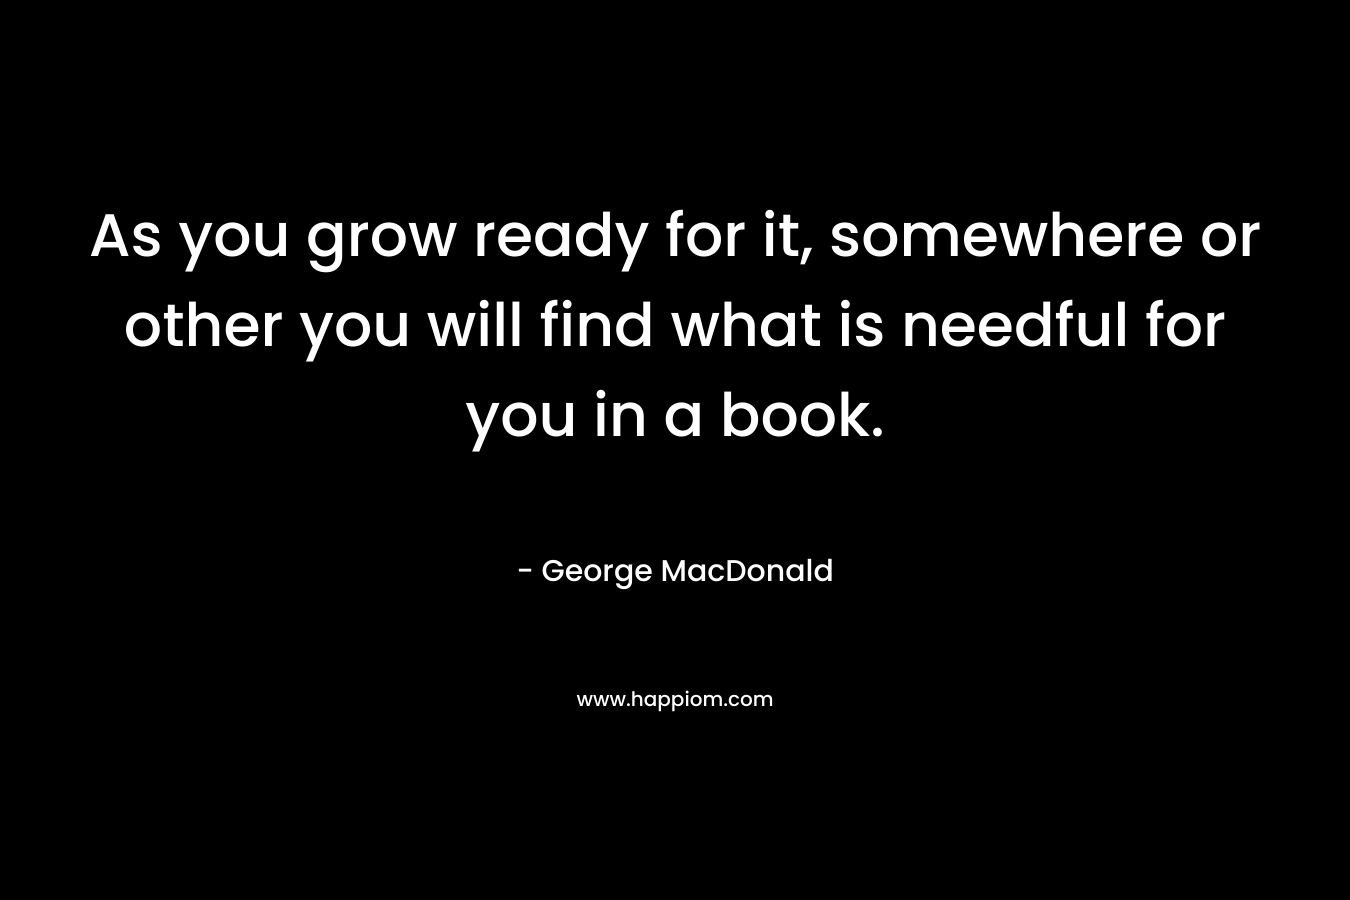 As you grow ready for it, somewhere or other you will find what is needful for you in a book.